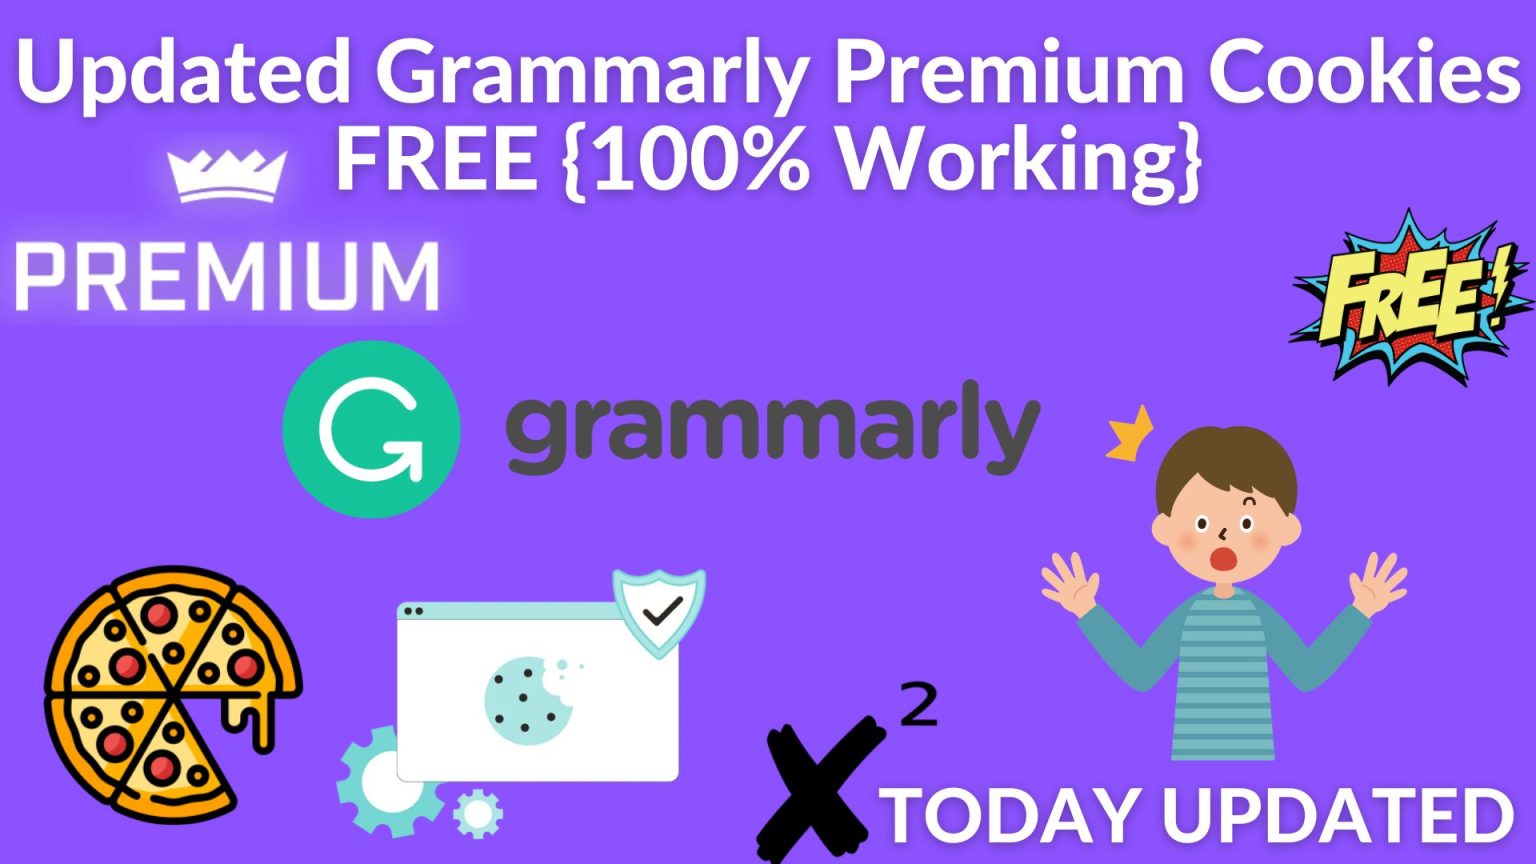 grammarly premium cookies for free